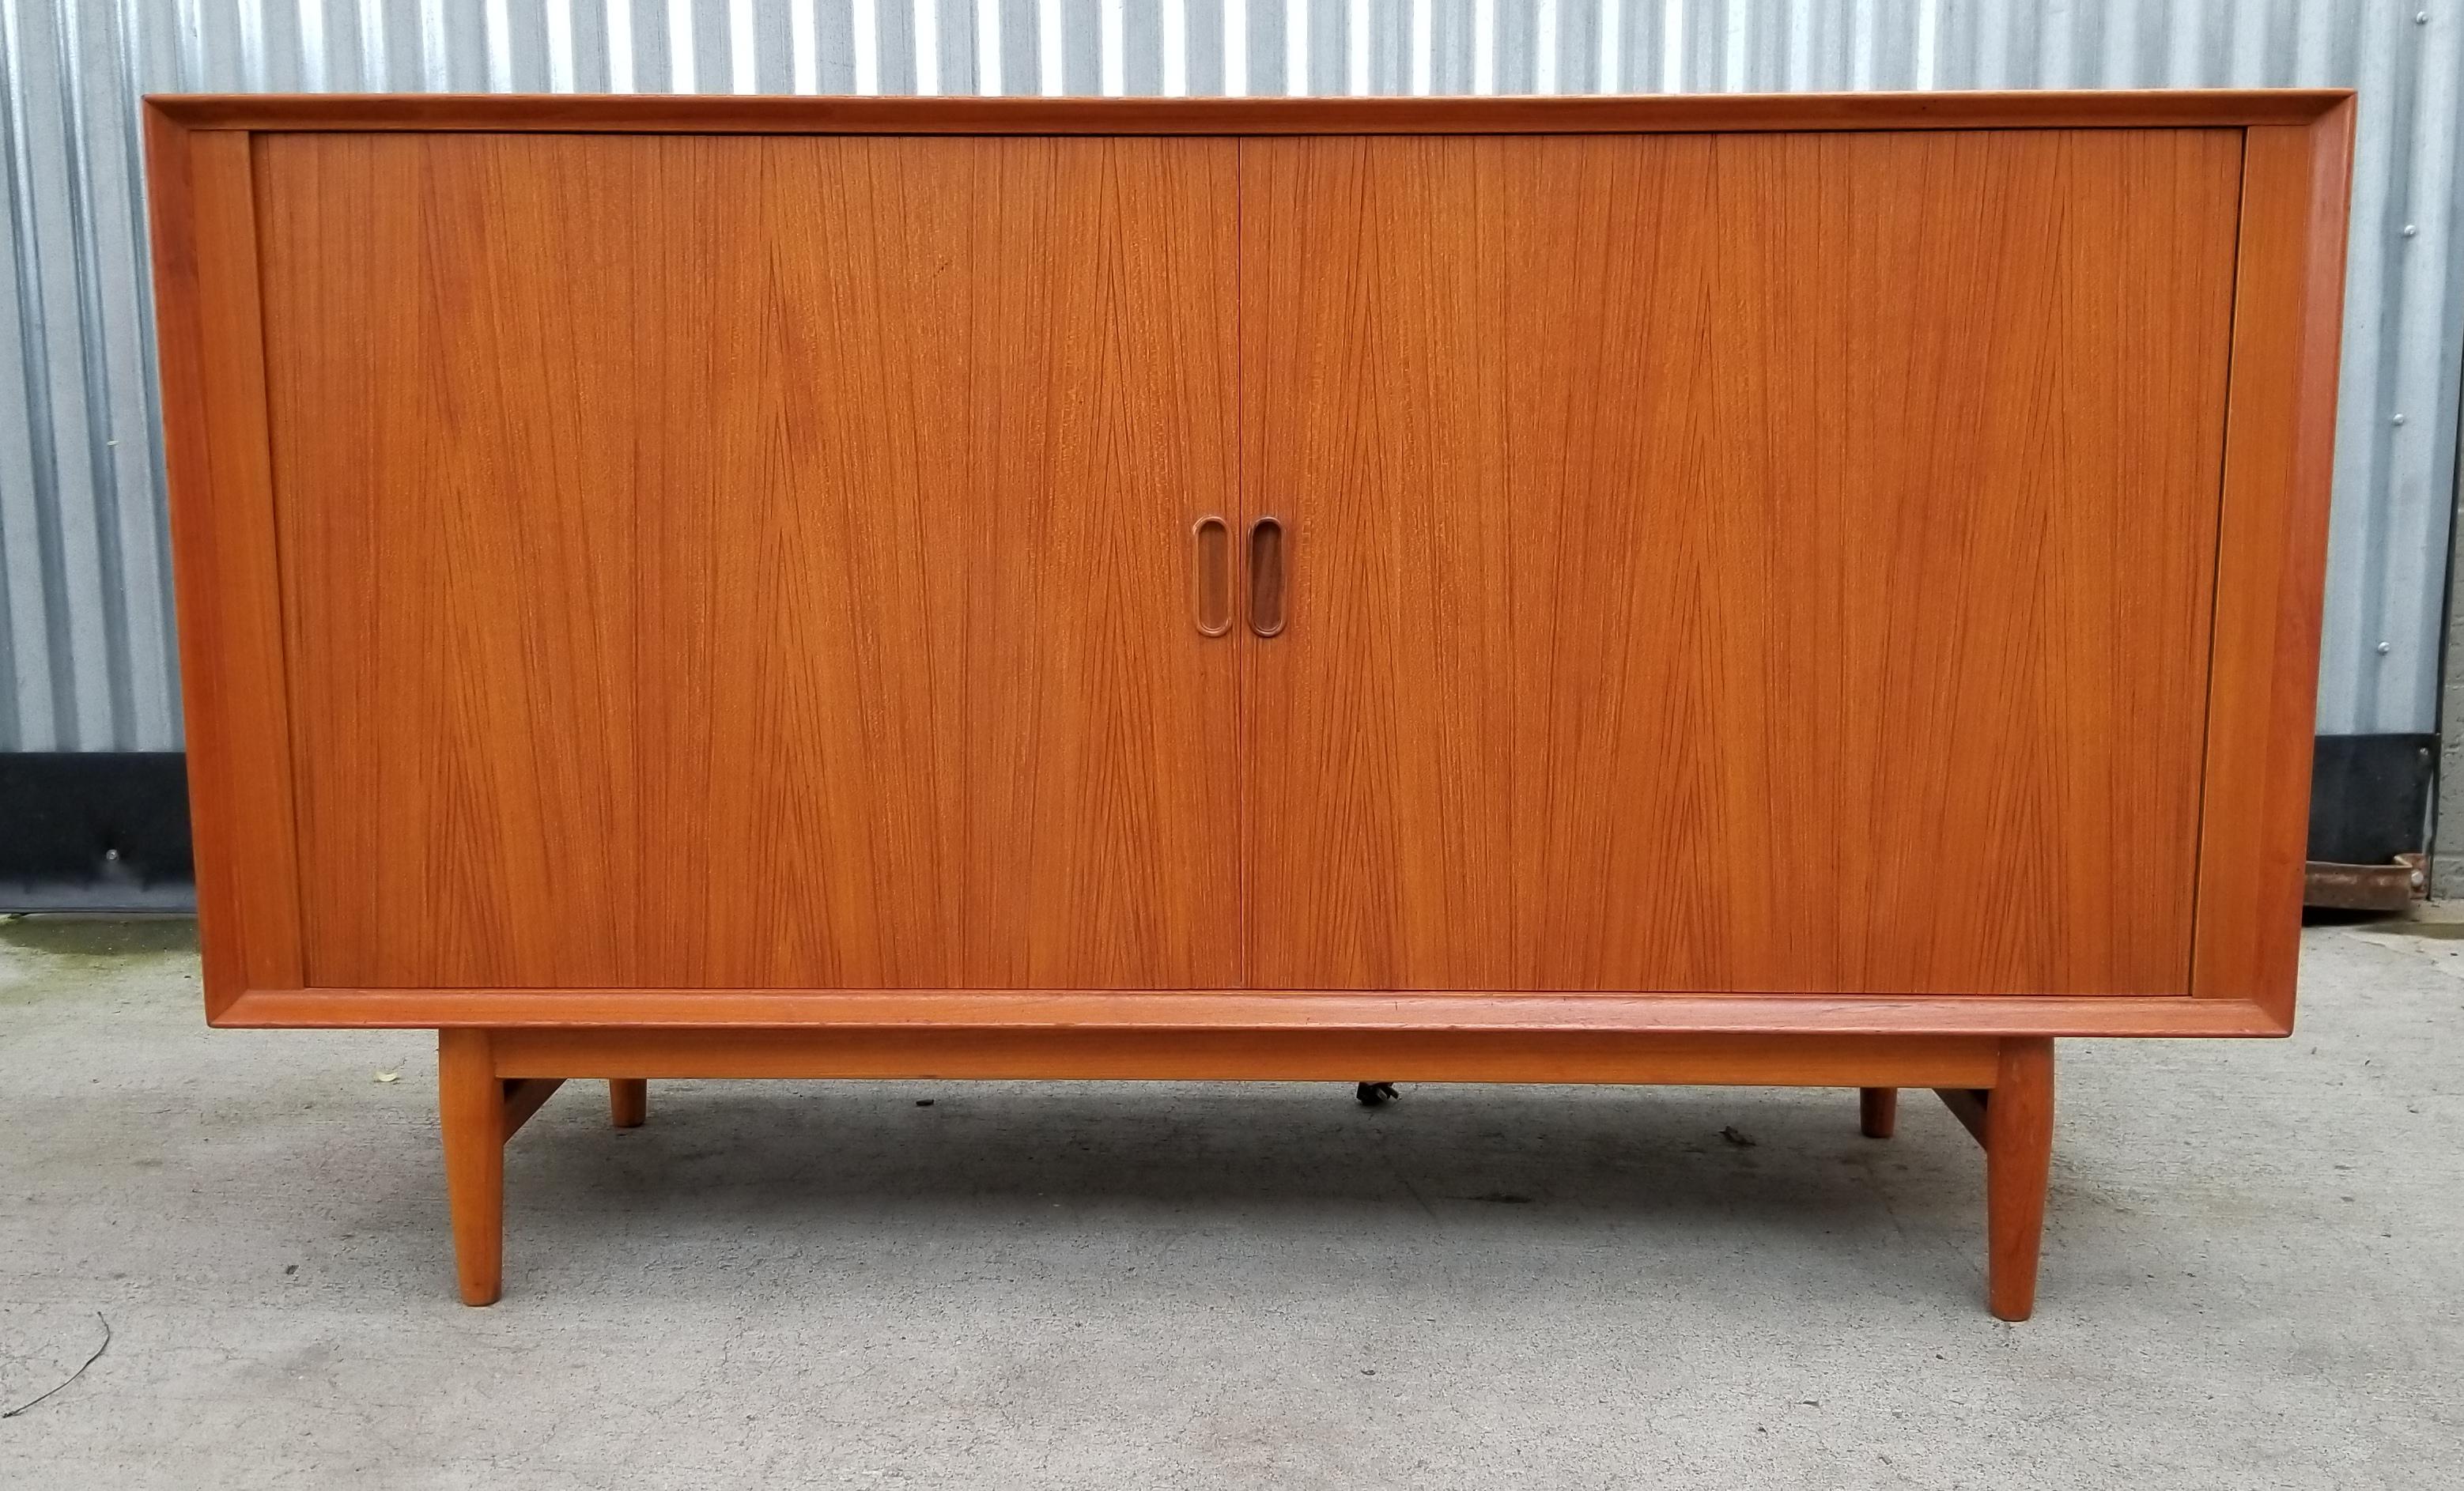 Here is an absolutely beautiful and scarce teak Danish modern stereo or Hifi cabinet designed by Arne Vodder, circa 1960s. Superb wood grain and amazing glow to original finish! Tambour doors open to a fitted interior with dividers to hold vinyl